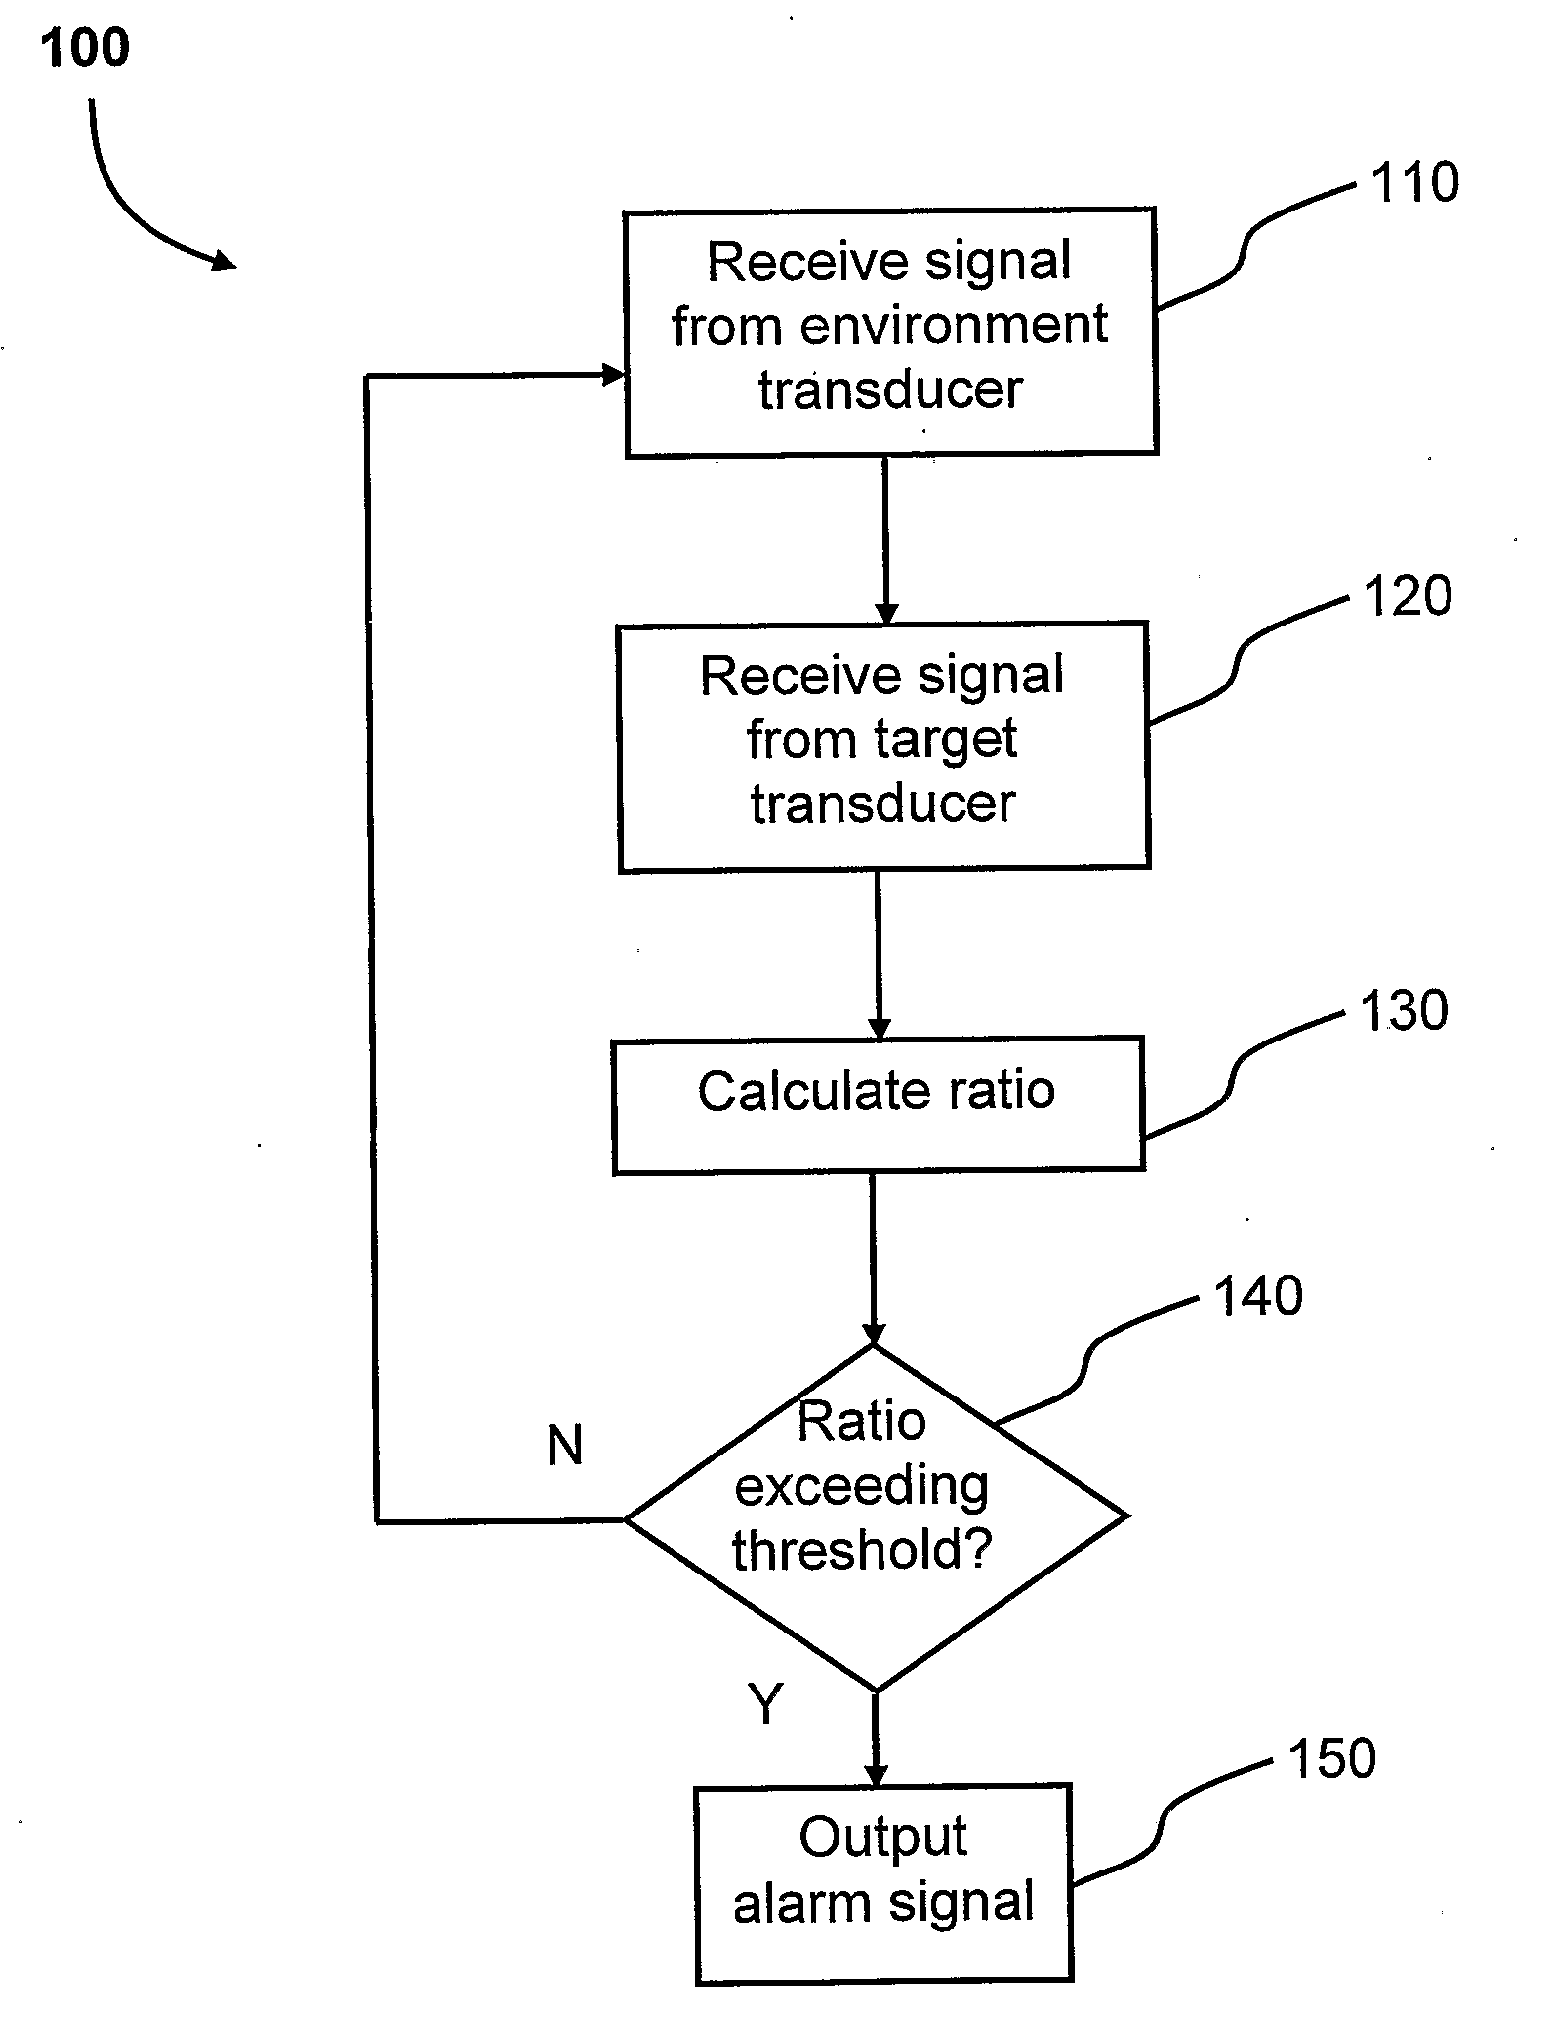 Vibration sensor assembly with ambient noise detection